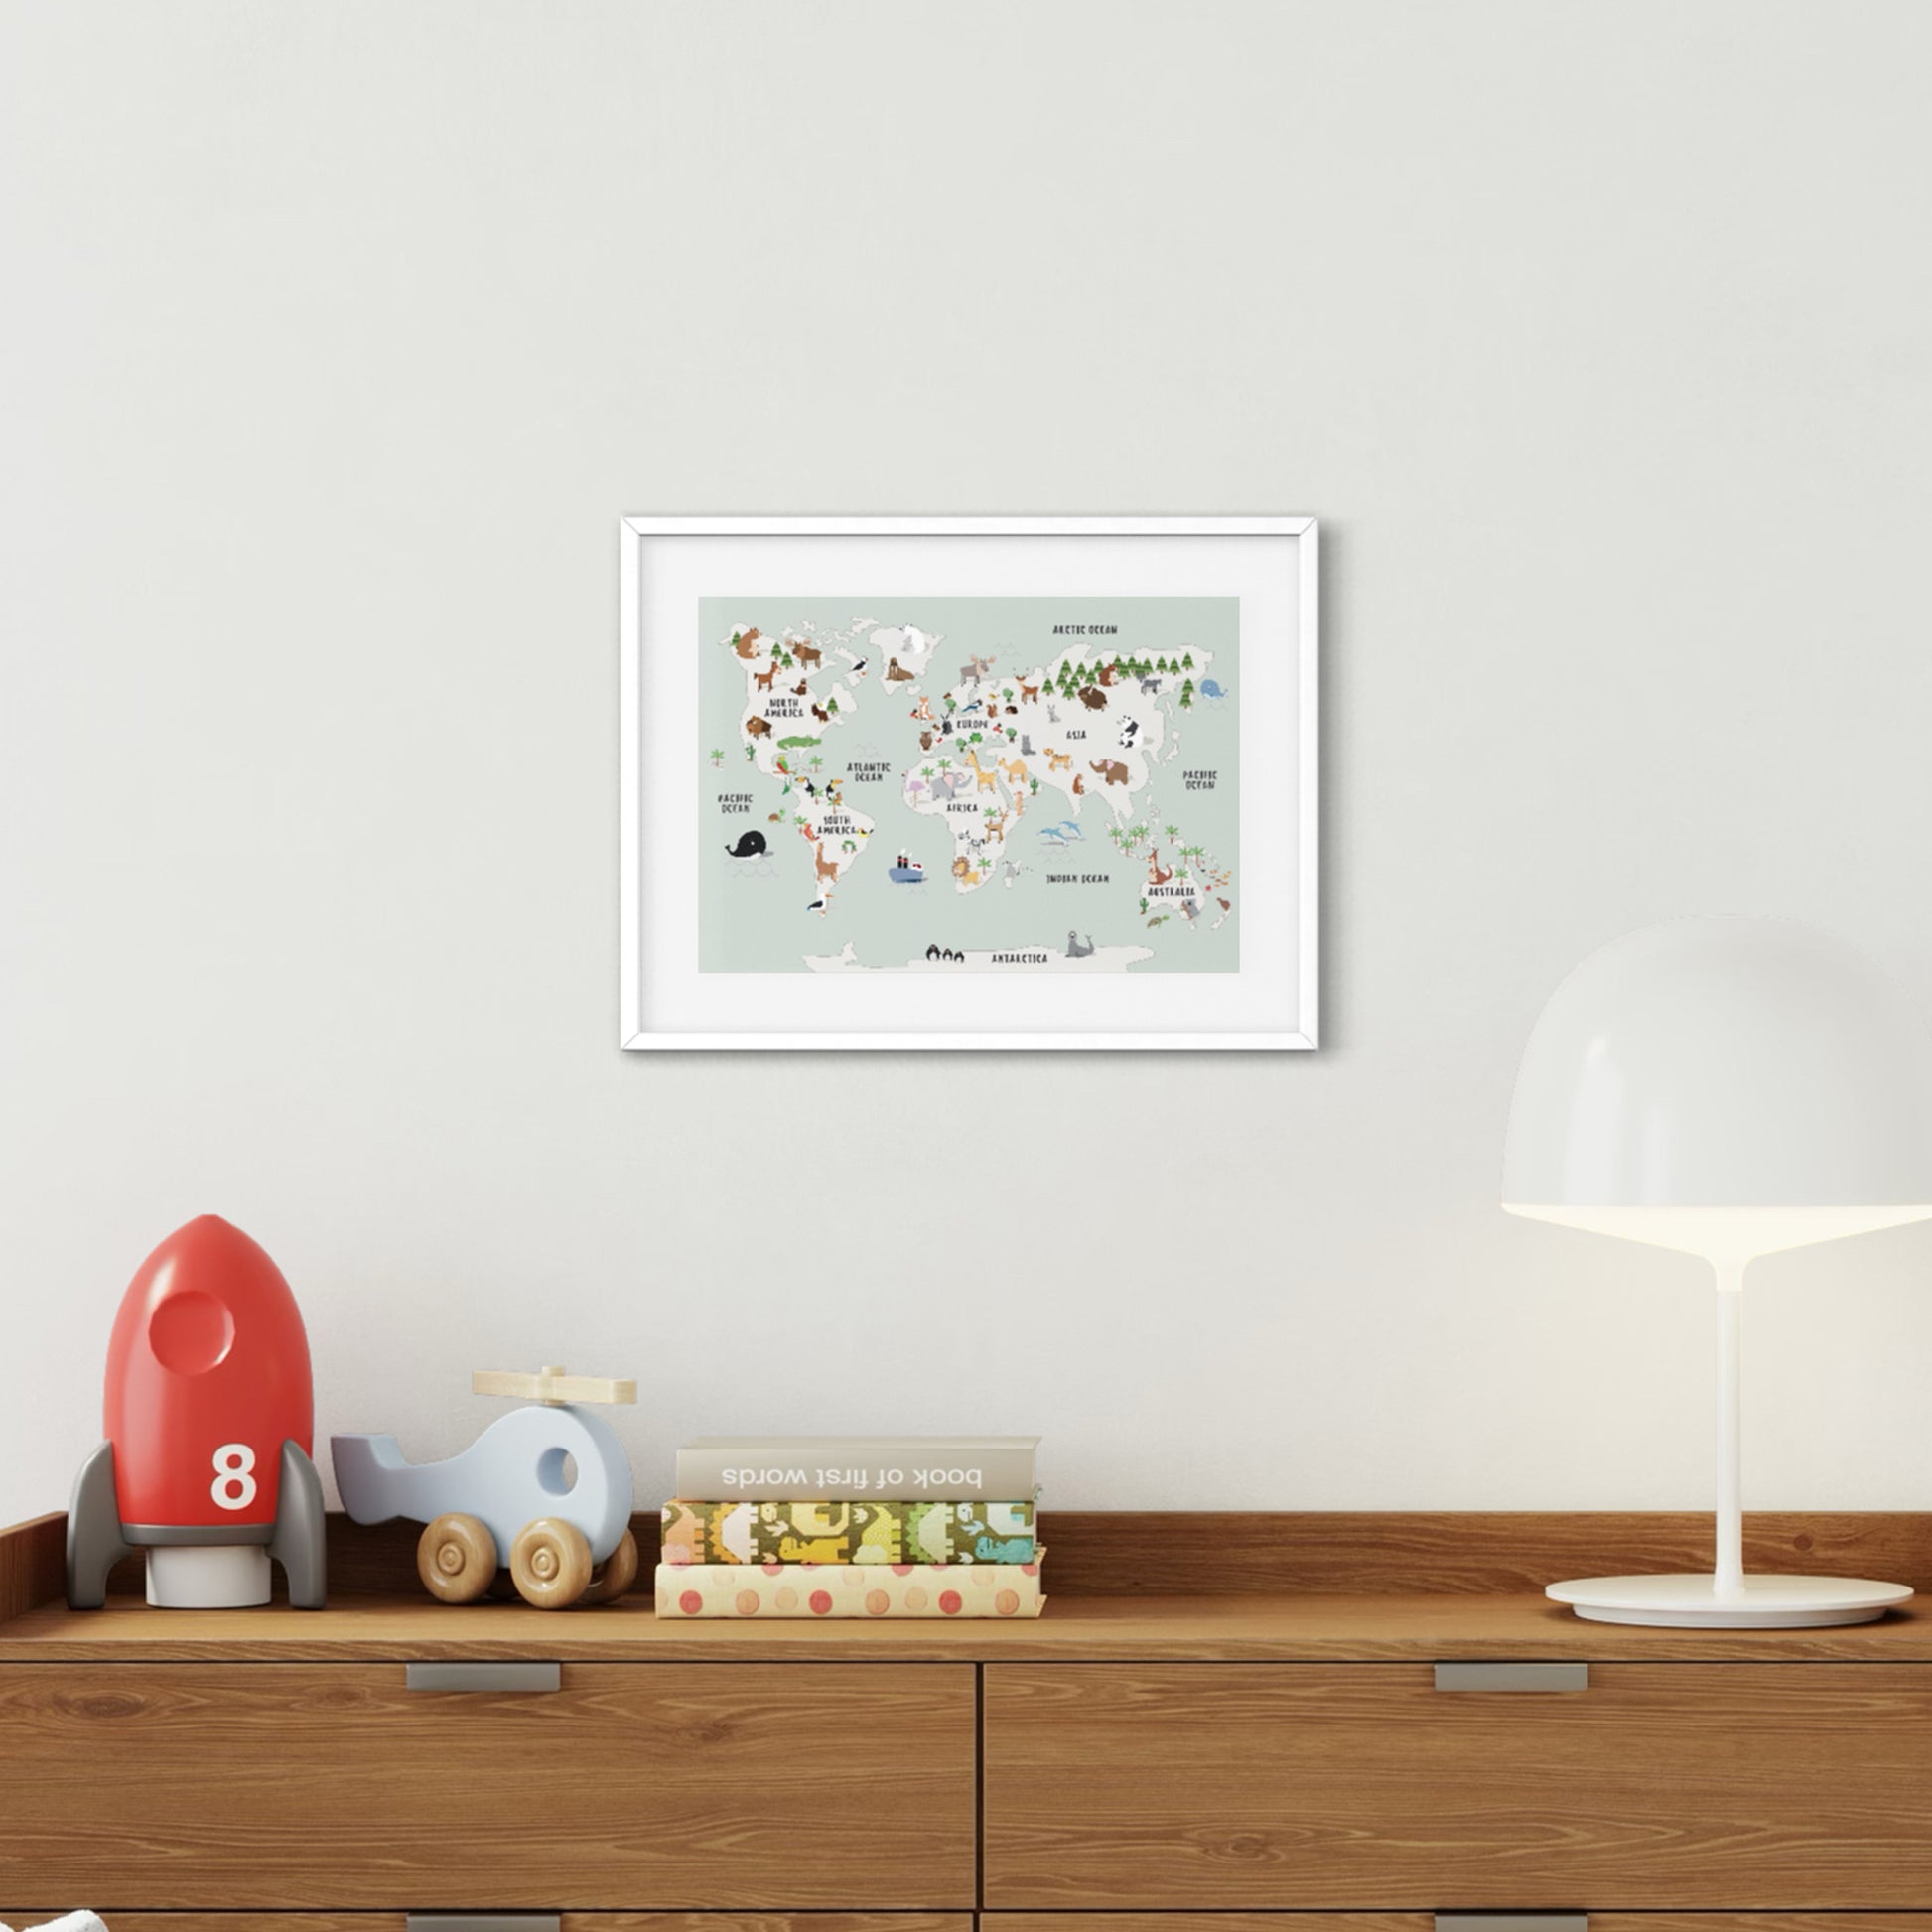 A3 Animal World Map Green Blue Framed Poster Print on Wall Above Chest of Drawers